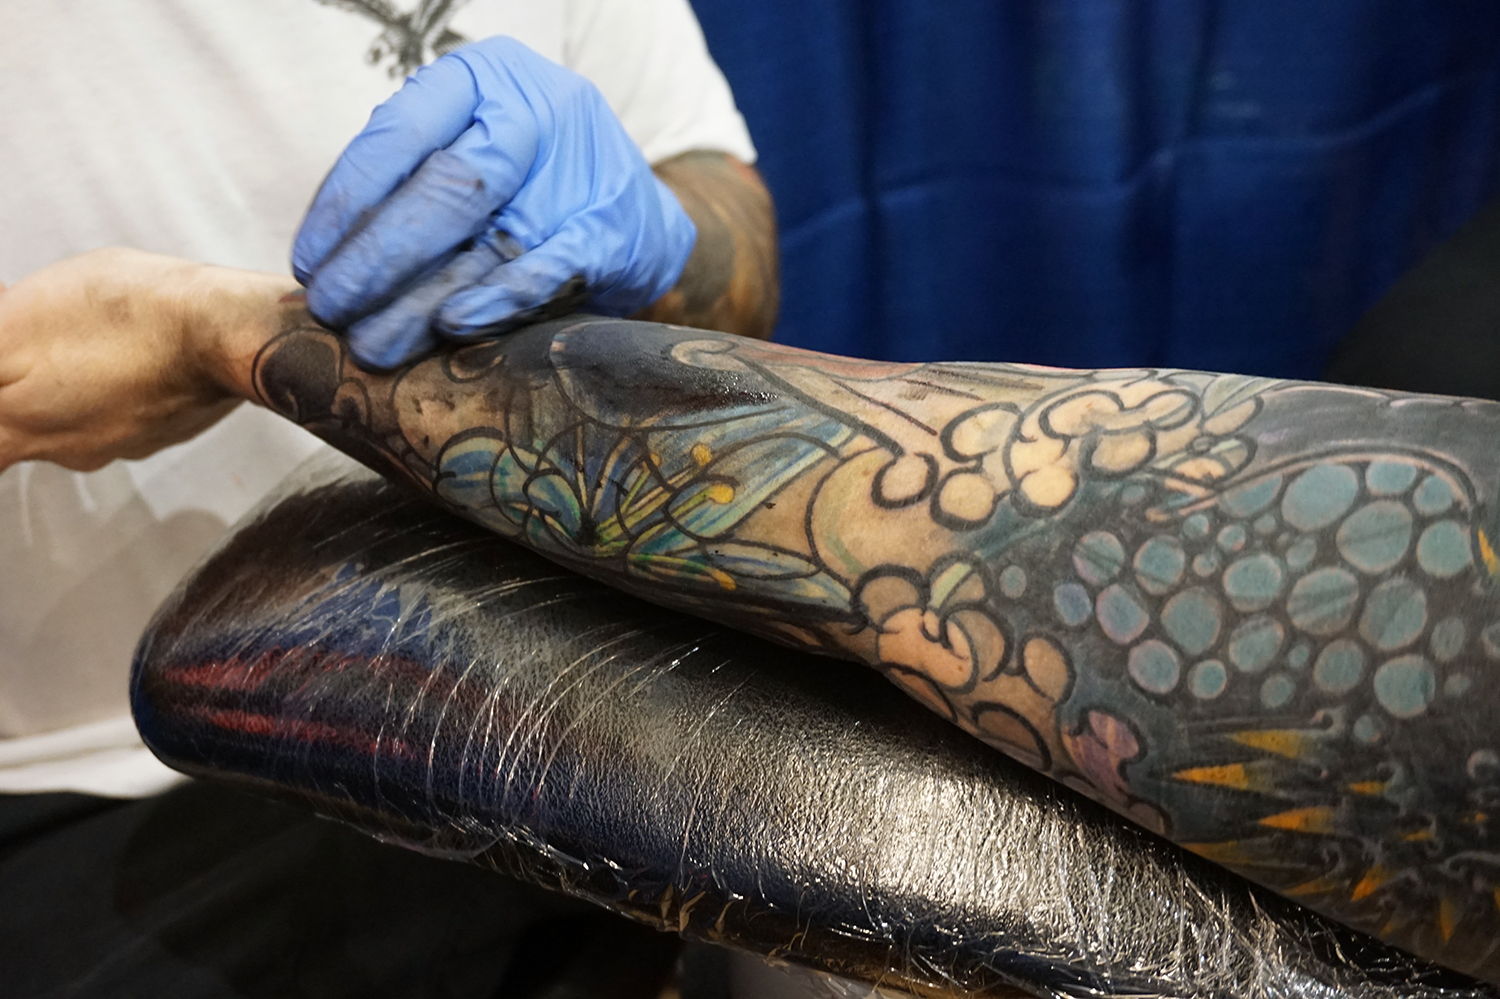 Coverup sleeve by tyler whitllock